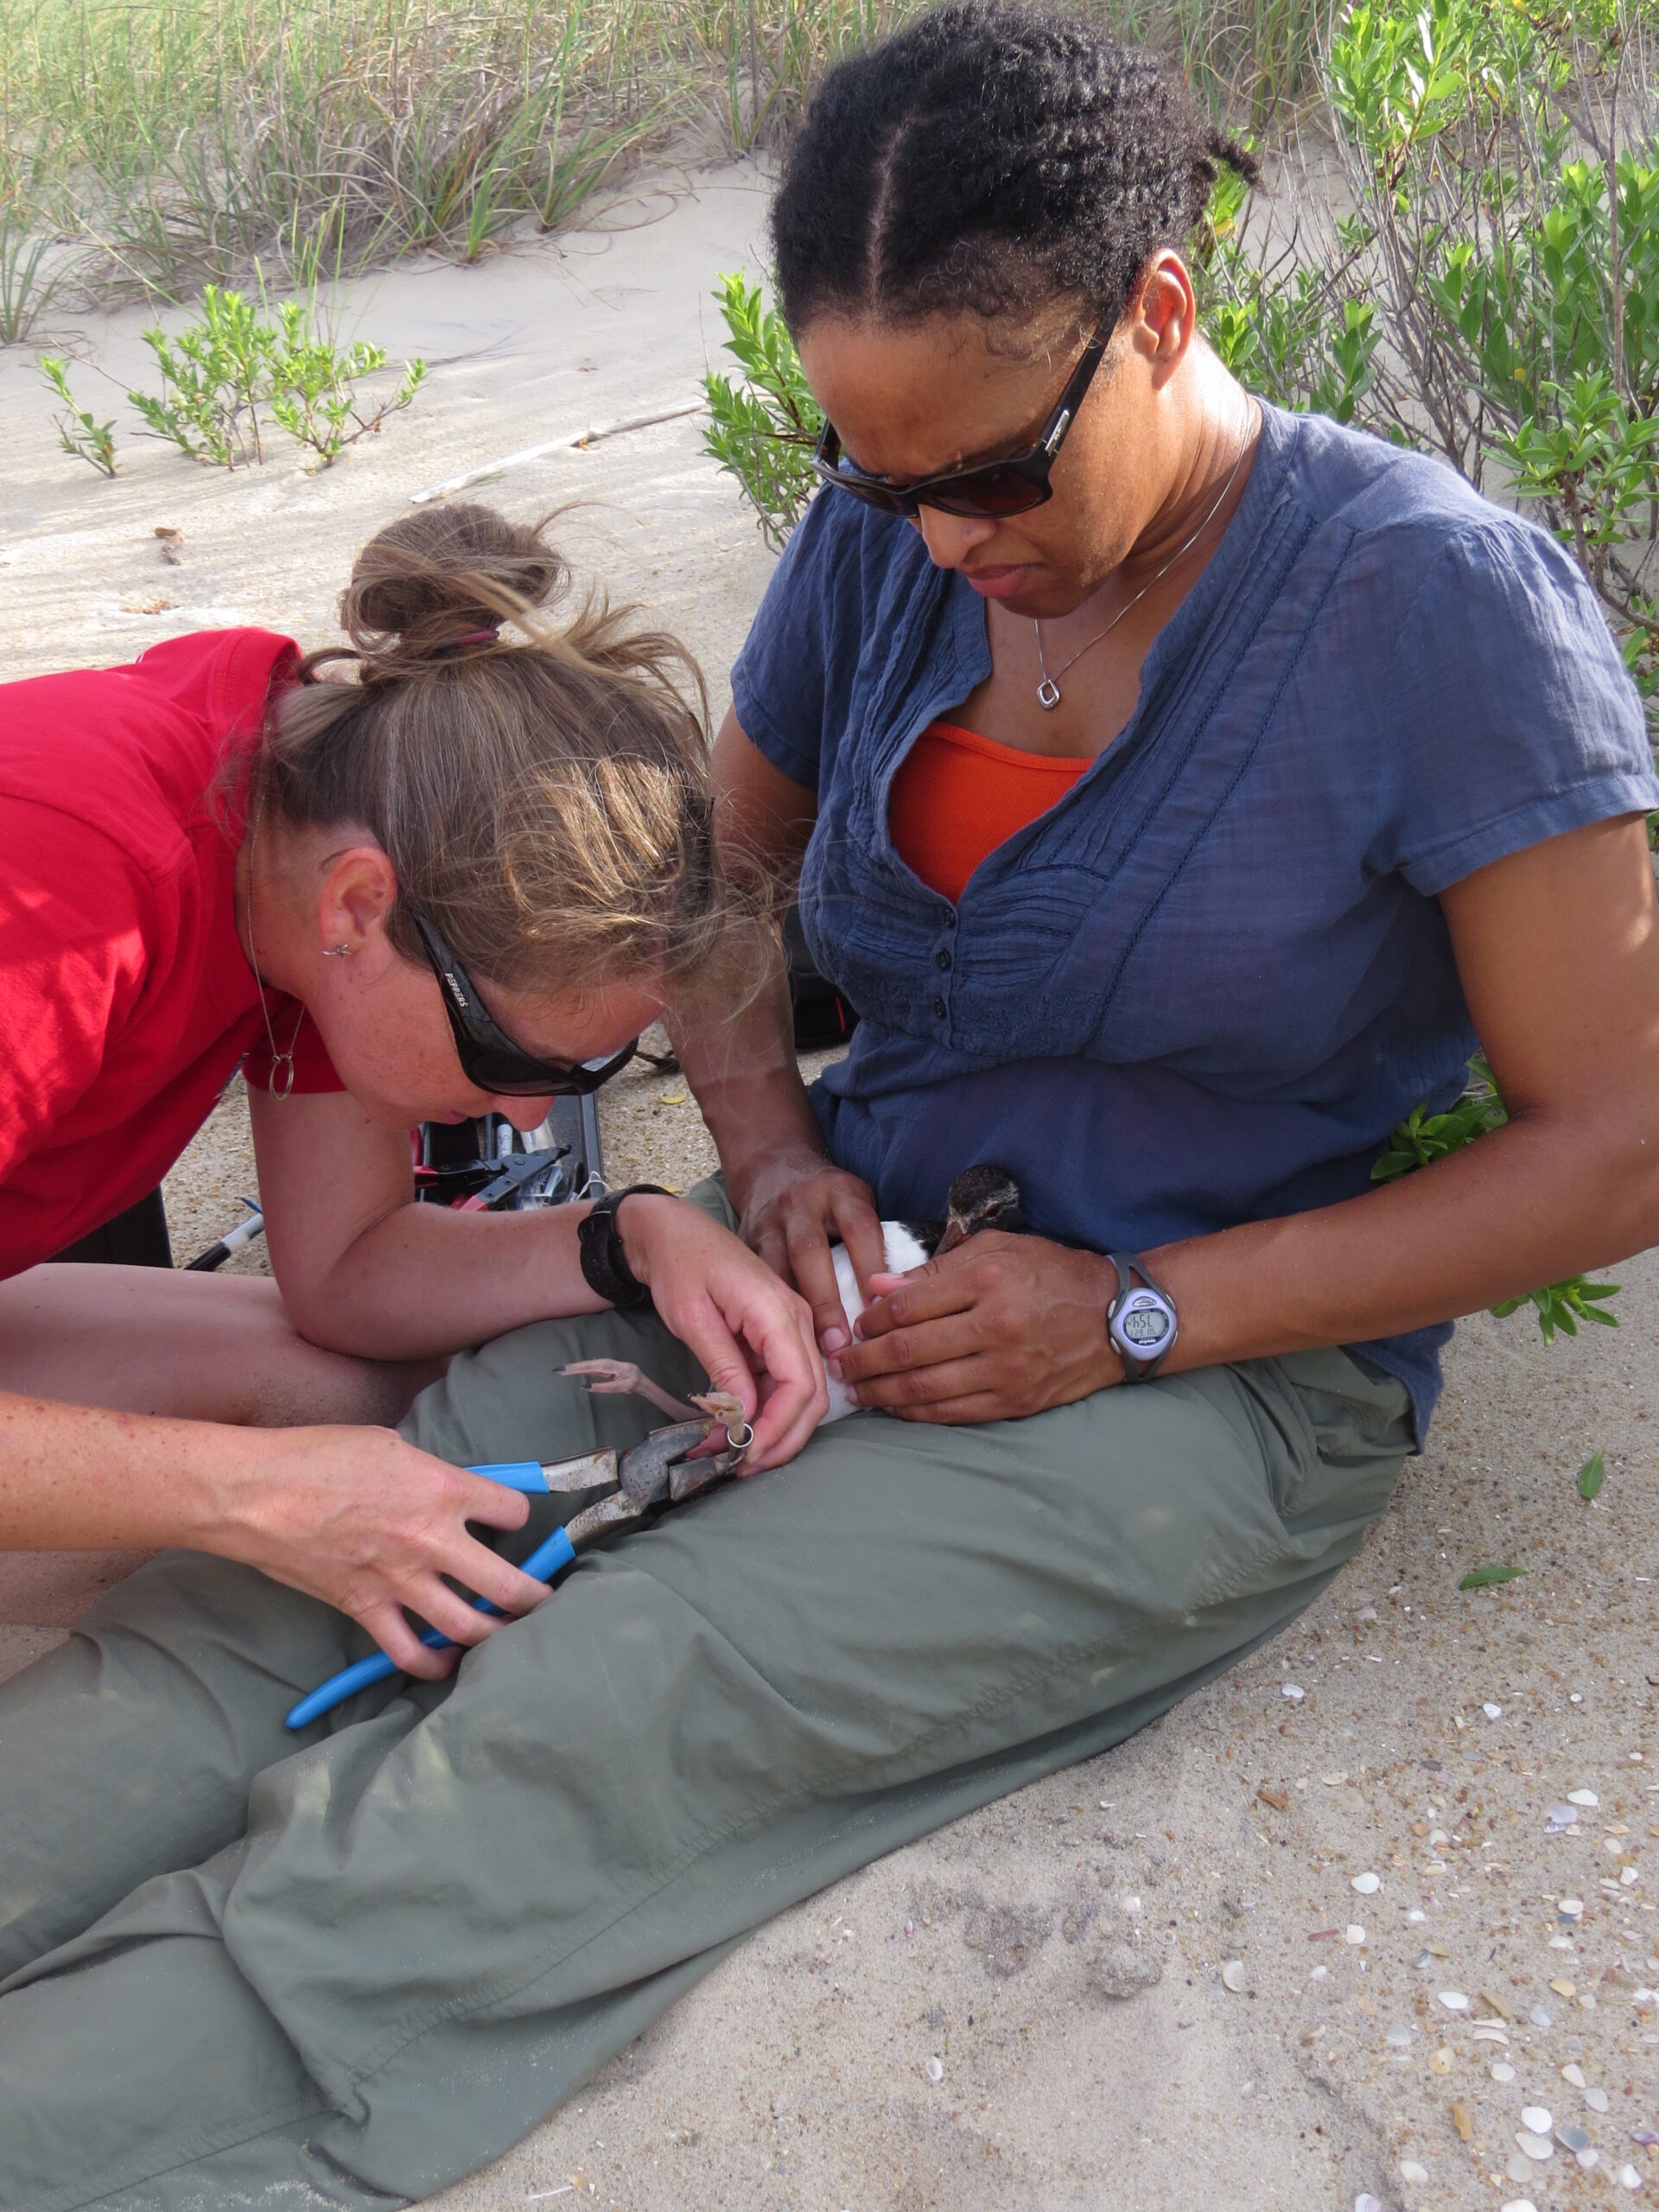 image: Shilo Felton (left) is one of a growing group of young scientists dedicated to studying how climate change affects North Carolina’s birds. Credit: Britta Muiznieks/NPS.